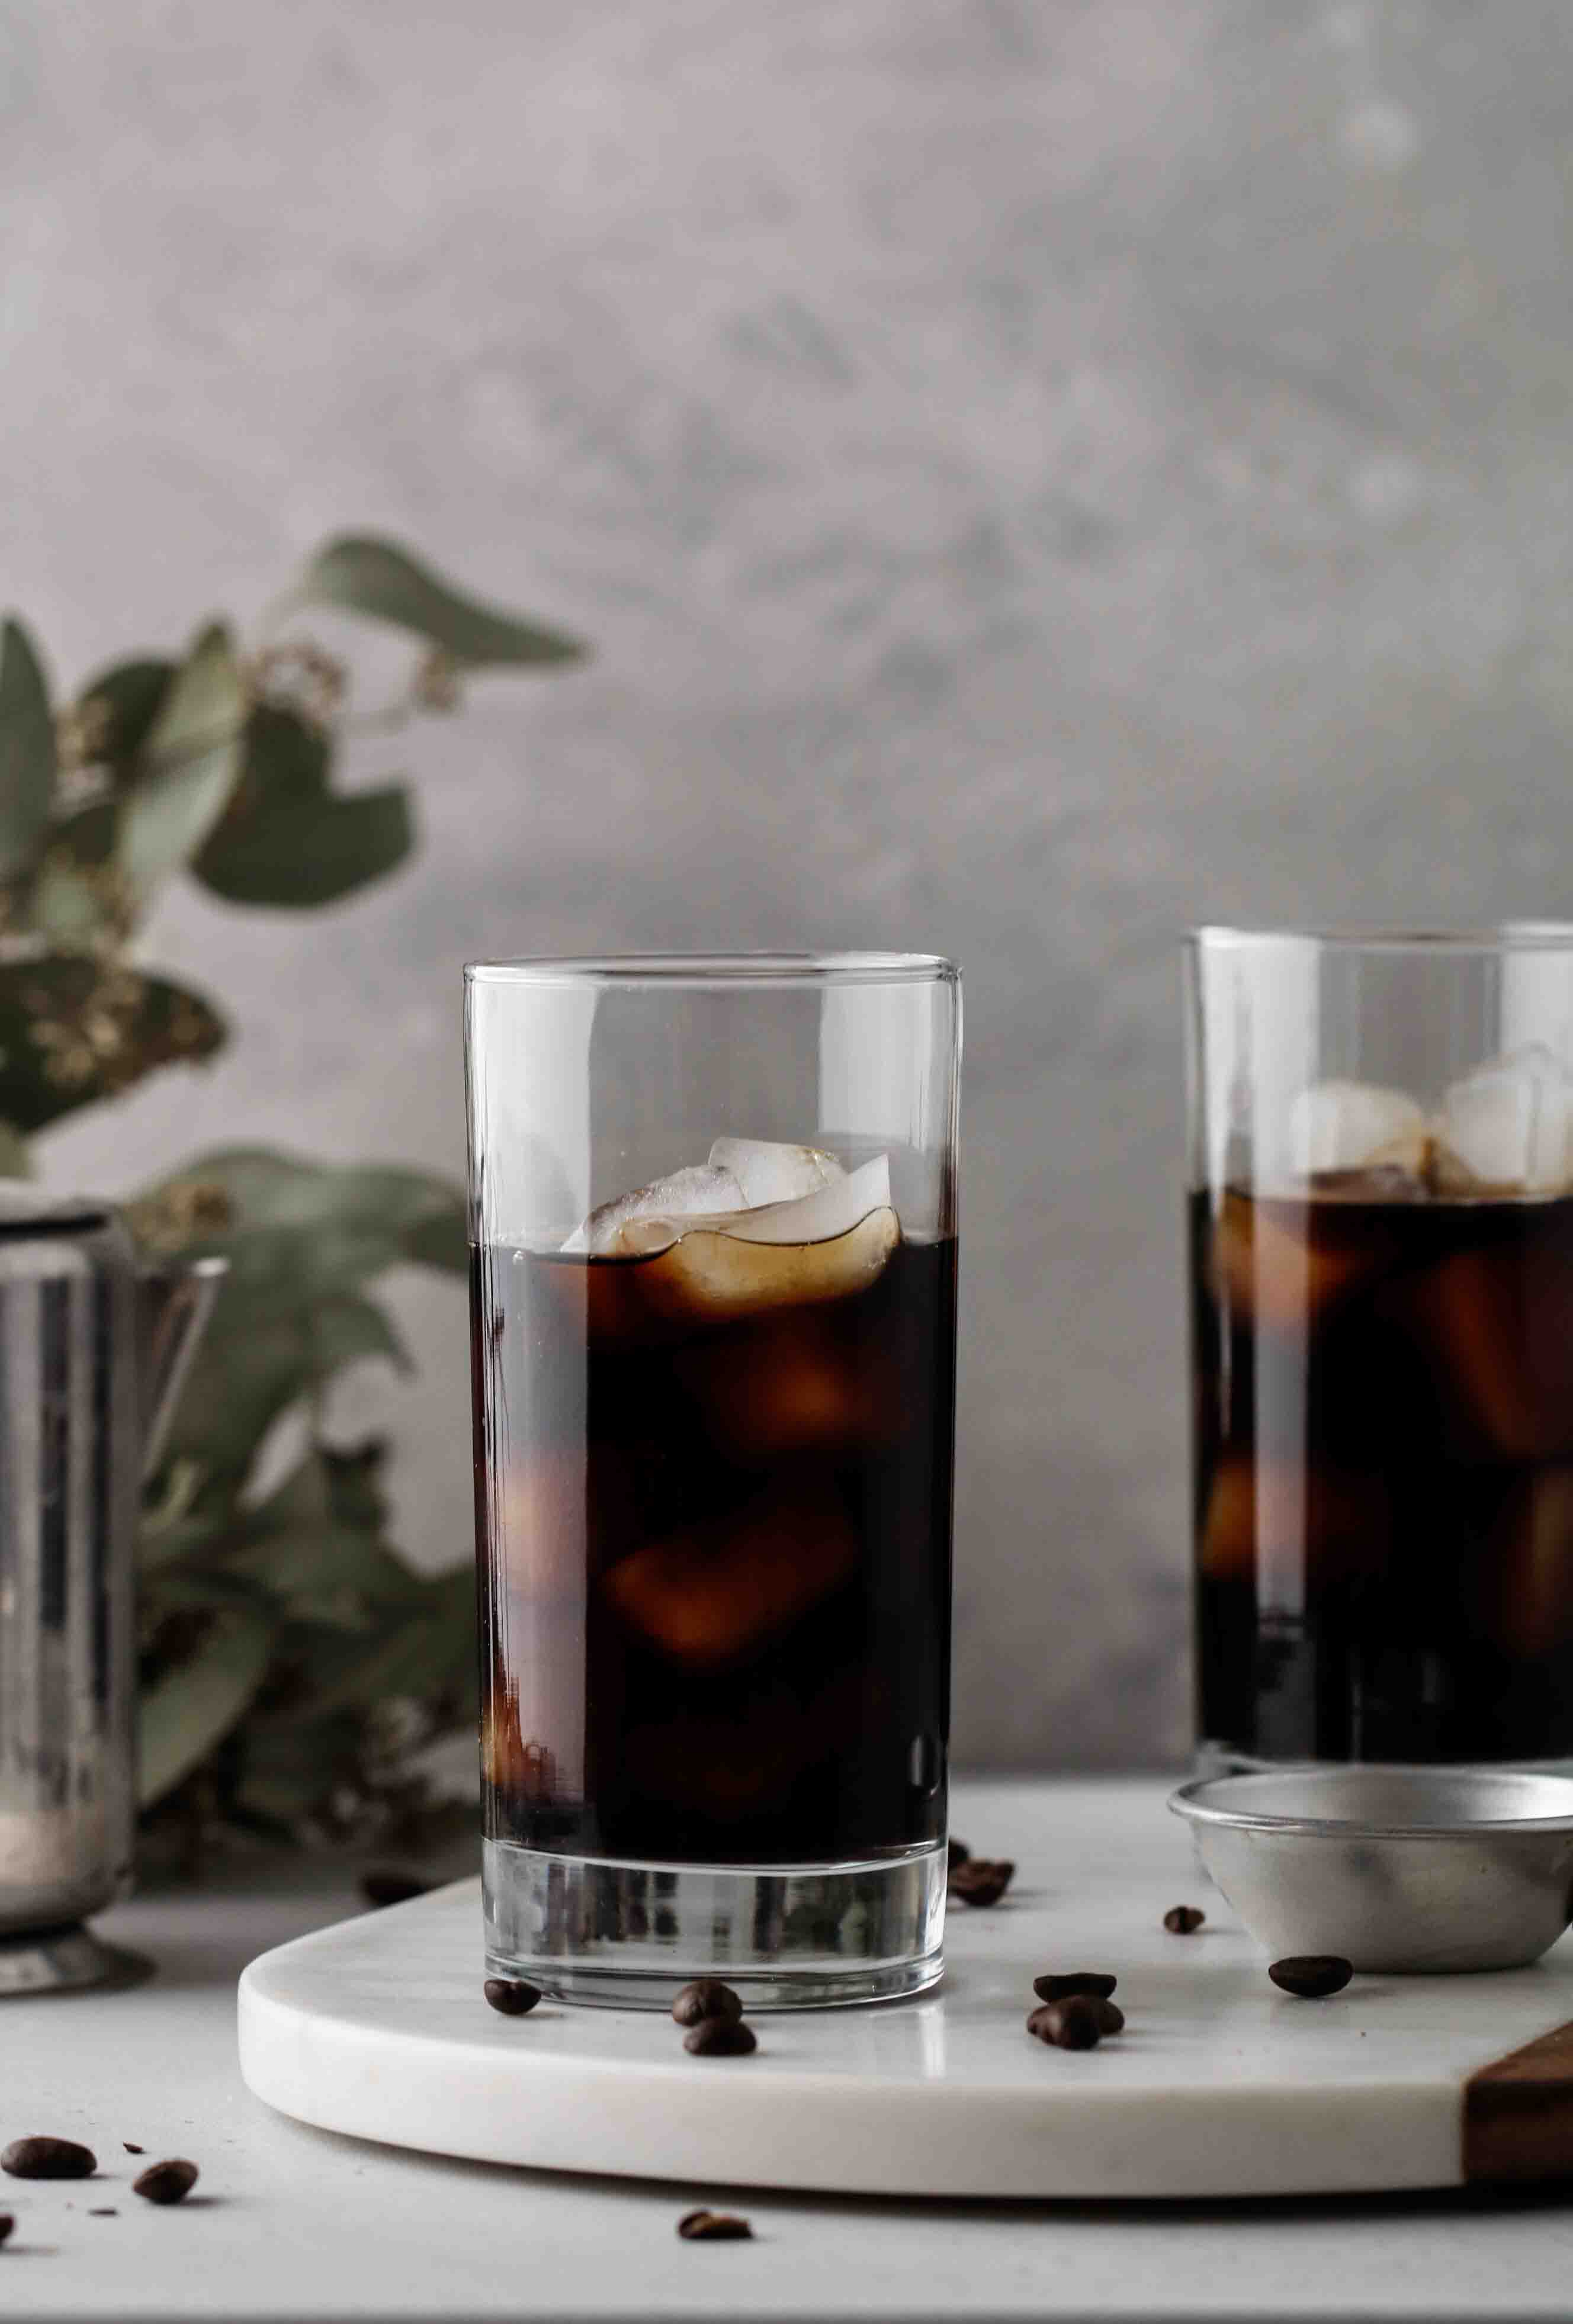 What cold brew coffee to use for Starbucks copycat recipe